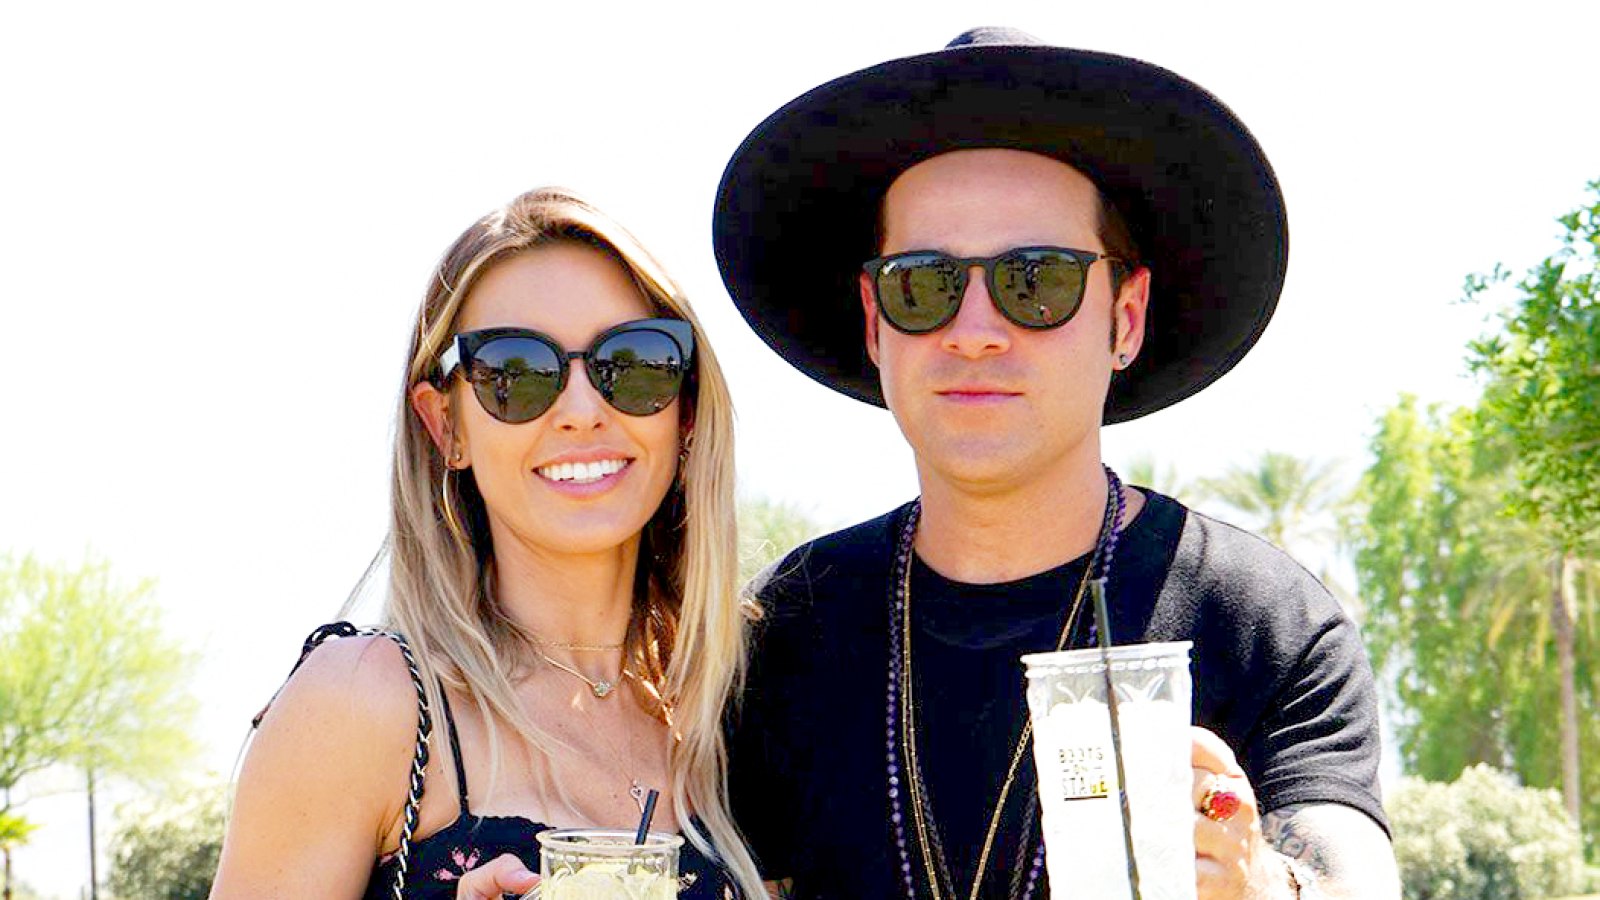 Audrina Patridge and Ryan Cabrera at the 2018 Stagecoach country music festival in Indio, California on April 28, 2018.